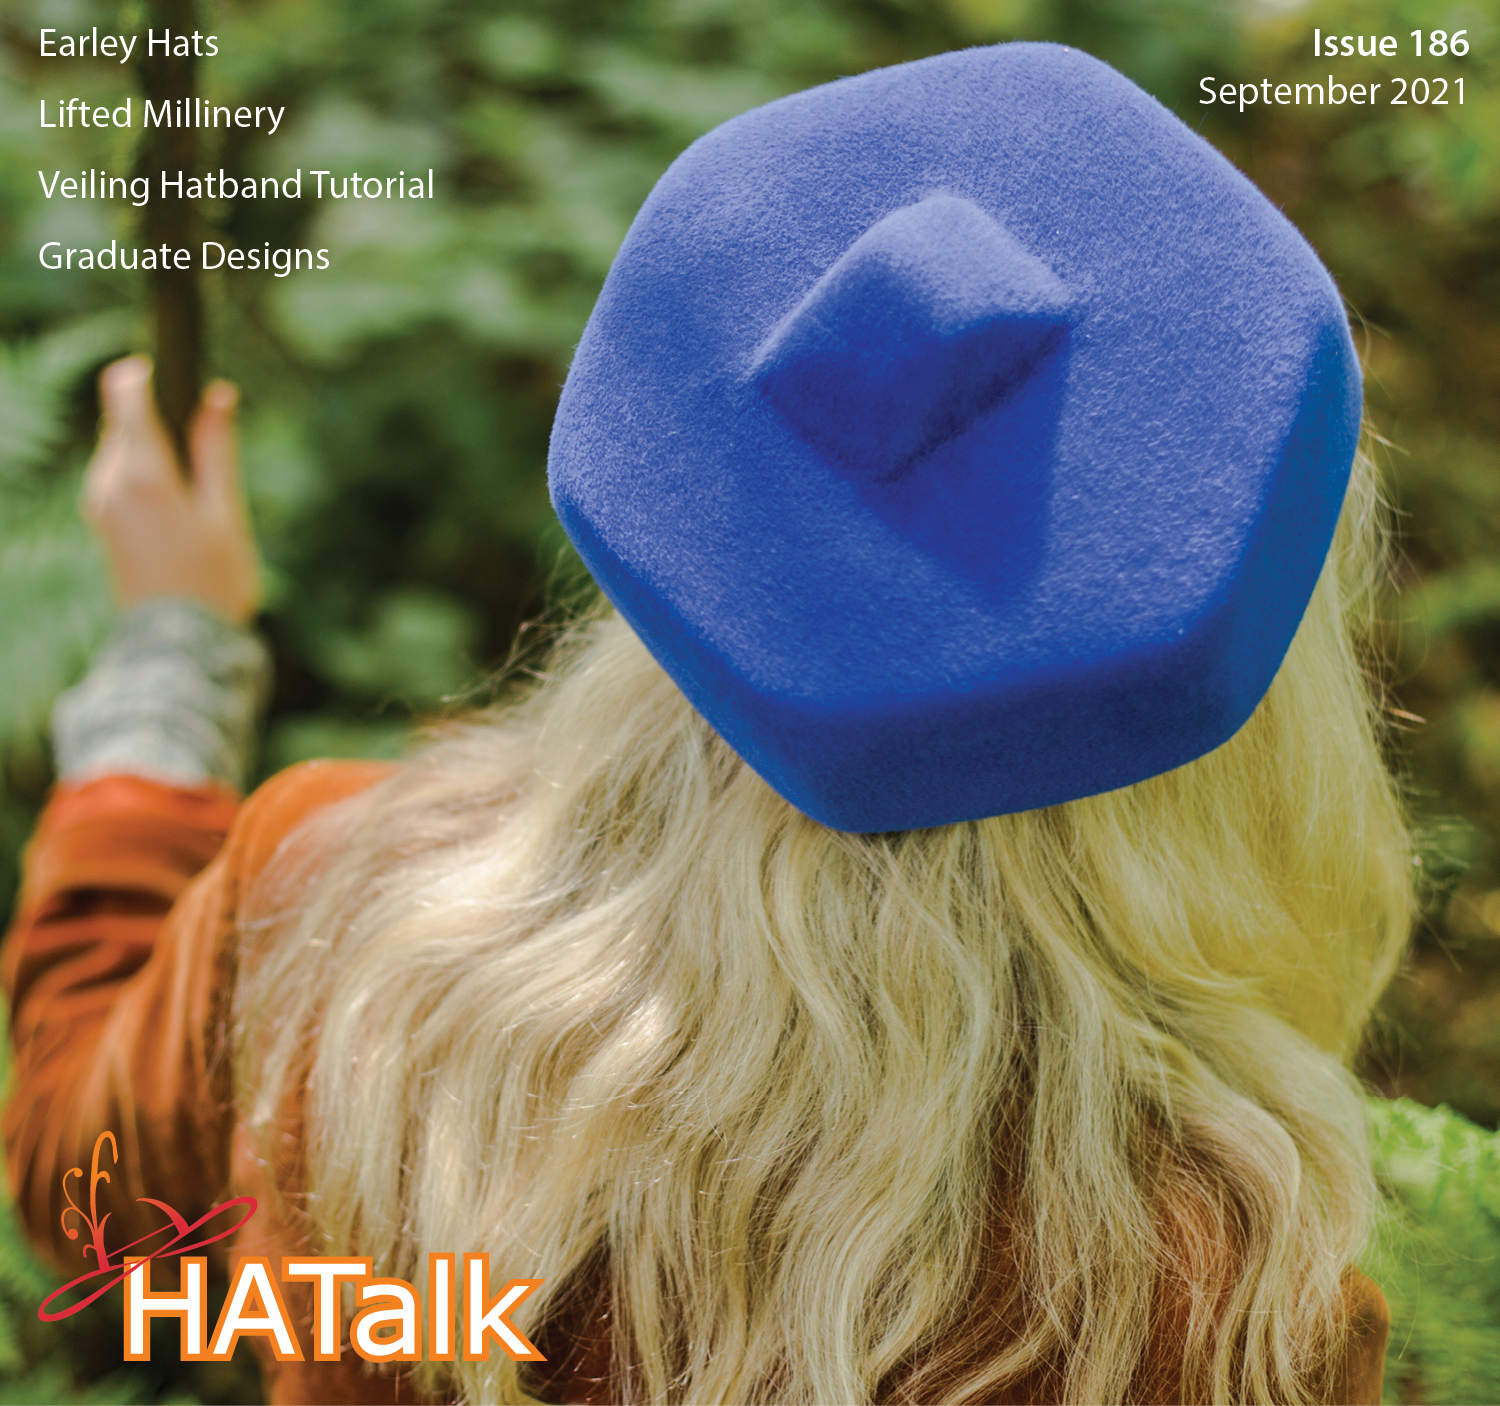 HATalk Issue 186 - September 2021. Cover hat by Earley Hats in Ireland.